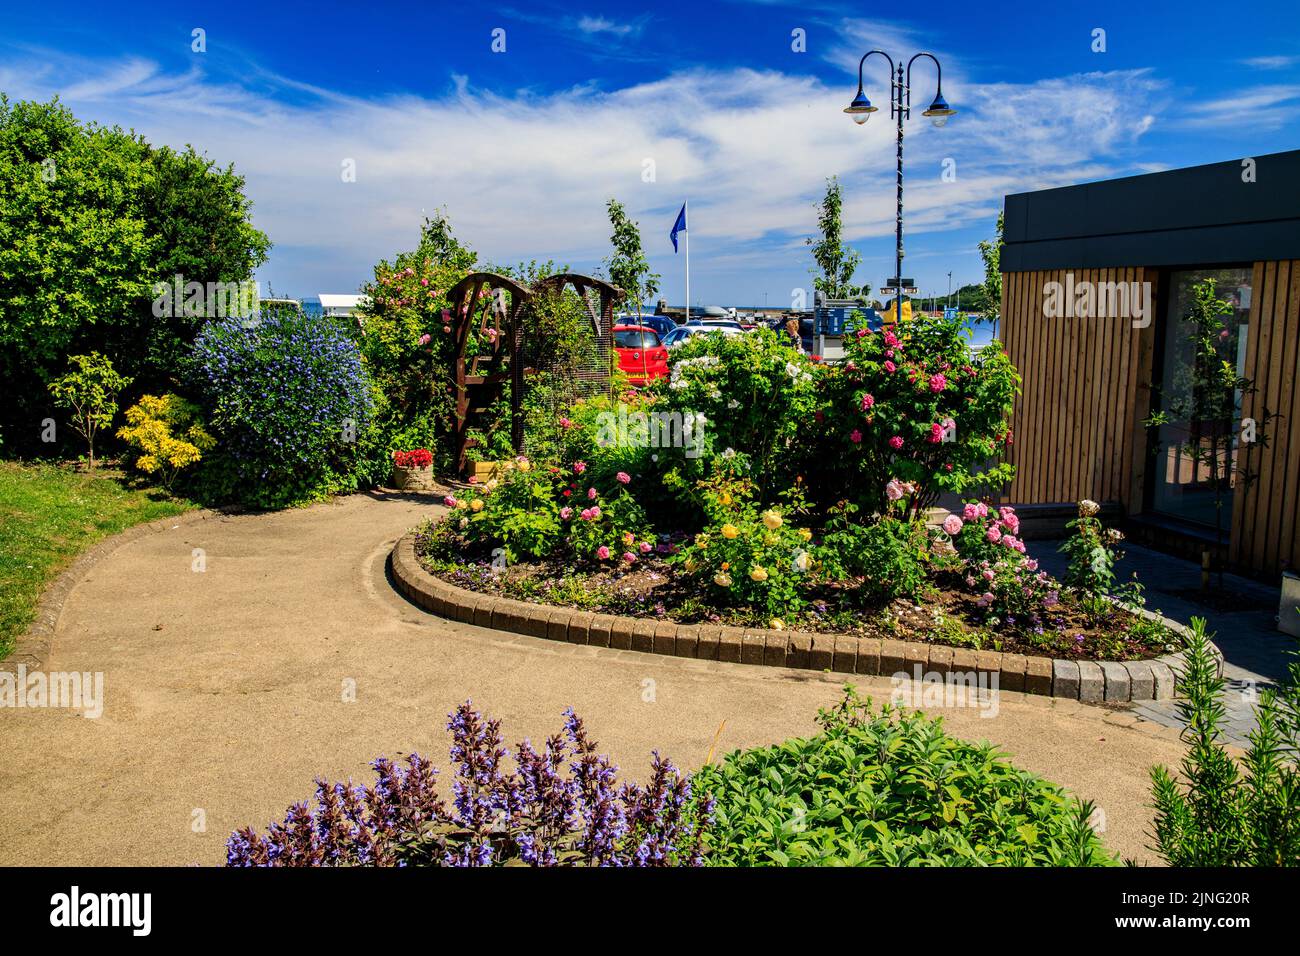 Saundersfoot has a sensory garden filled with colourful, tactile or perfumed plants in front of the Hean castle hotel, Pembrokeshire, Wales, UK Stock Photo